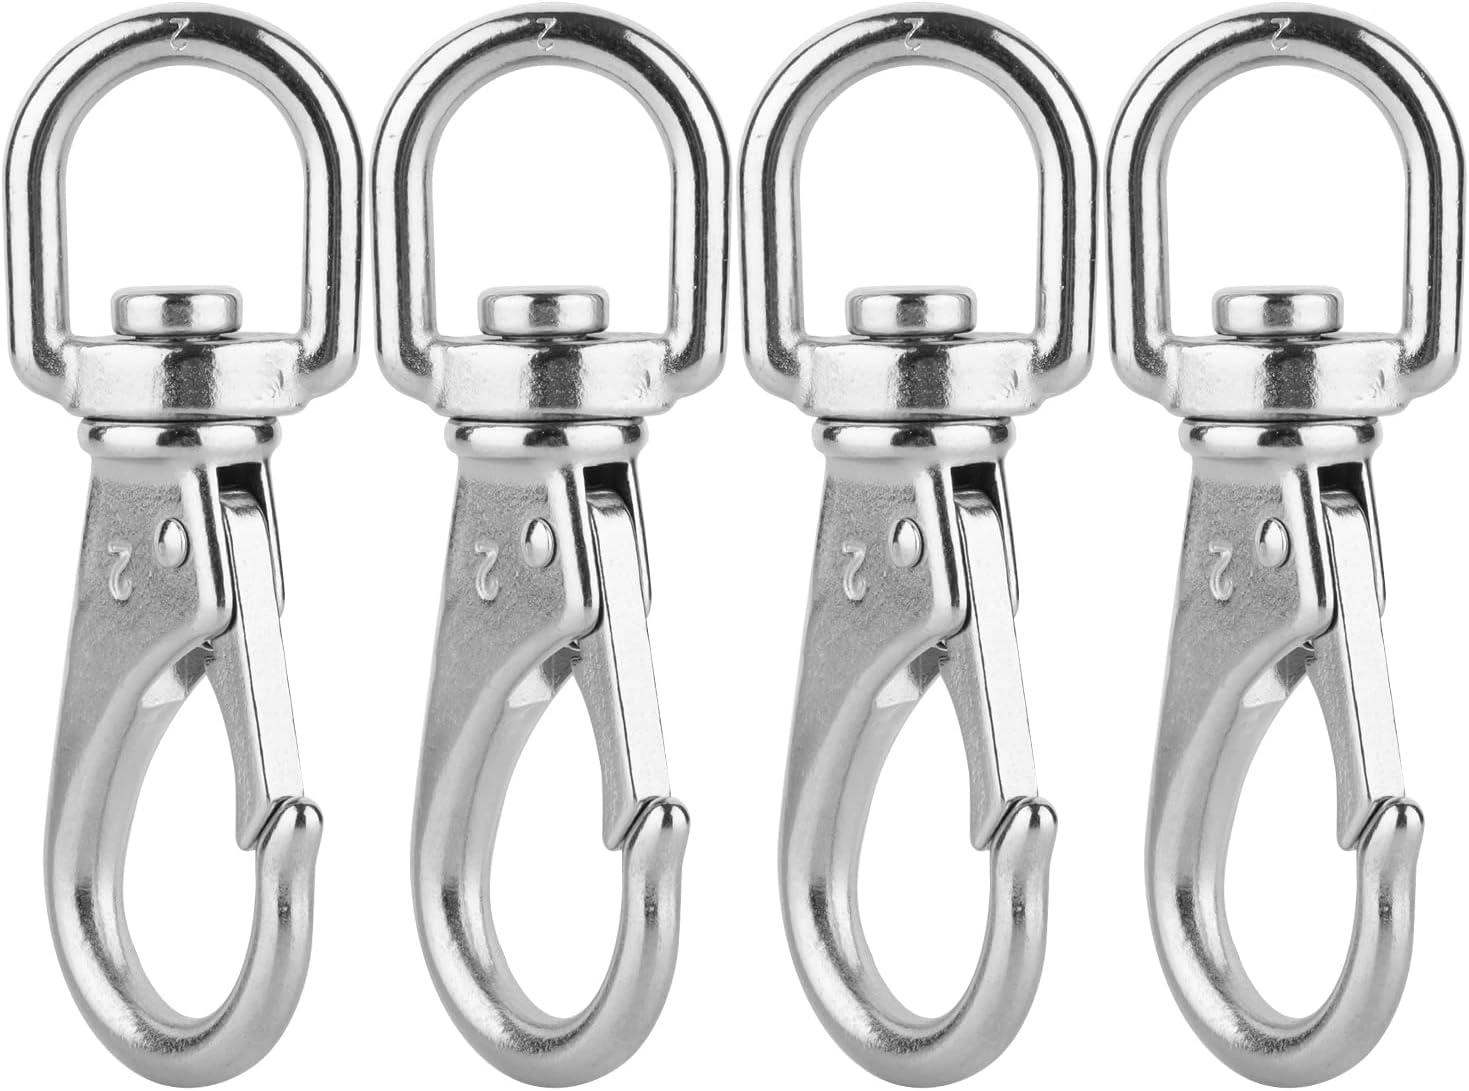 Faneta 4 inch Brass Swivel Snap Hooks Heavy Duty 3/4 inch Swivel Eye -  Solid Brass Scuba Diving Clips #2 - Seadog Line, Anchor Lines, Bags,  Belting, Leashes, Straps, Luggage, Leathercarft (Pack